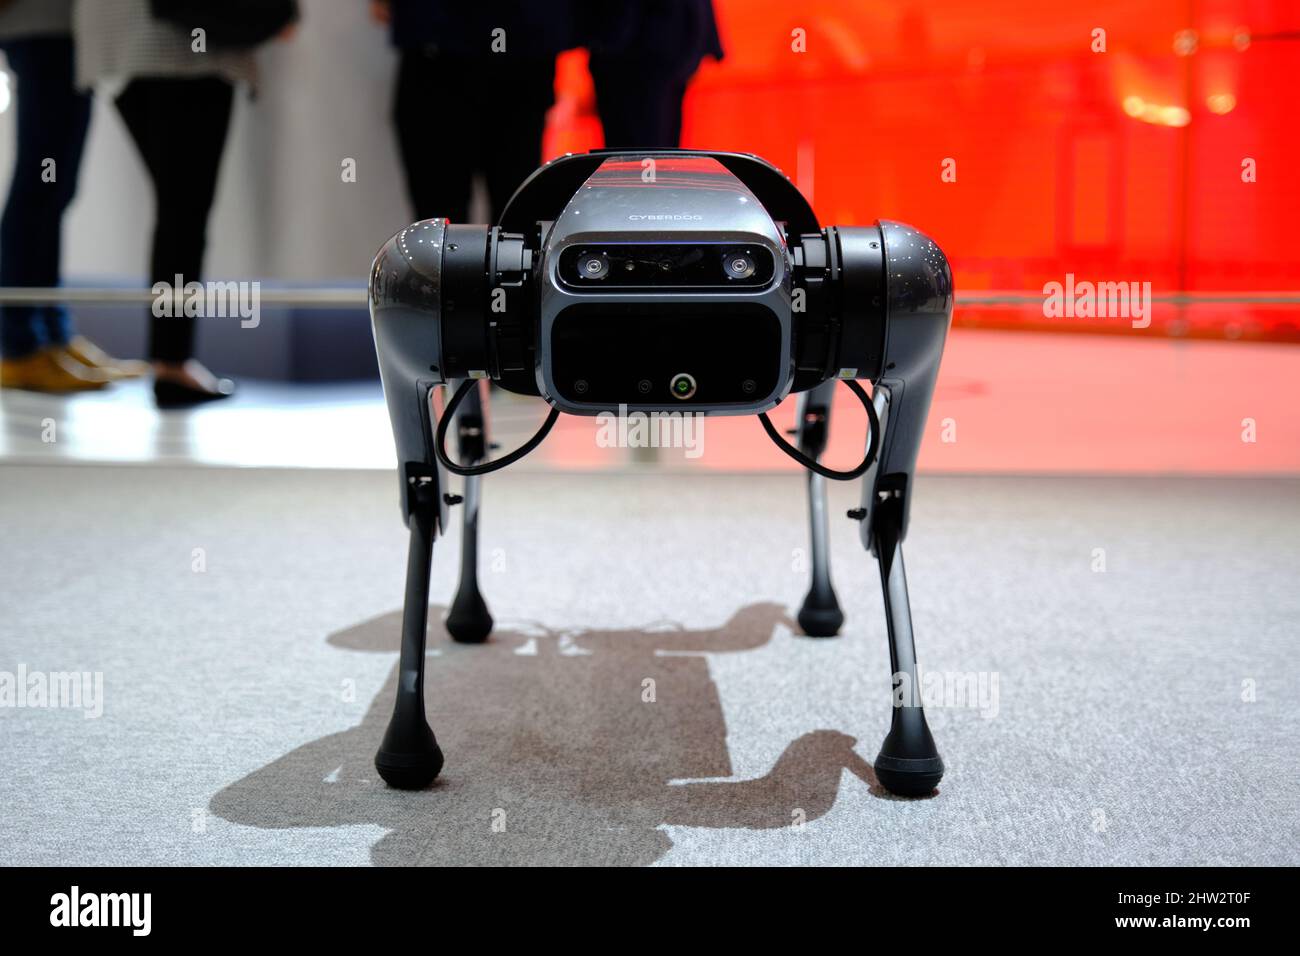 Barcelona, Spain - March 2nd 2022 - Mobile World Congress - Cyberdog at Xiaomi booth Stock Photo